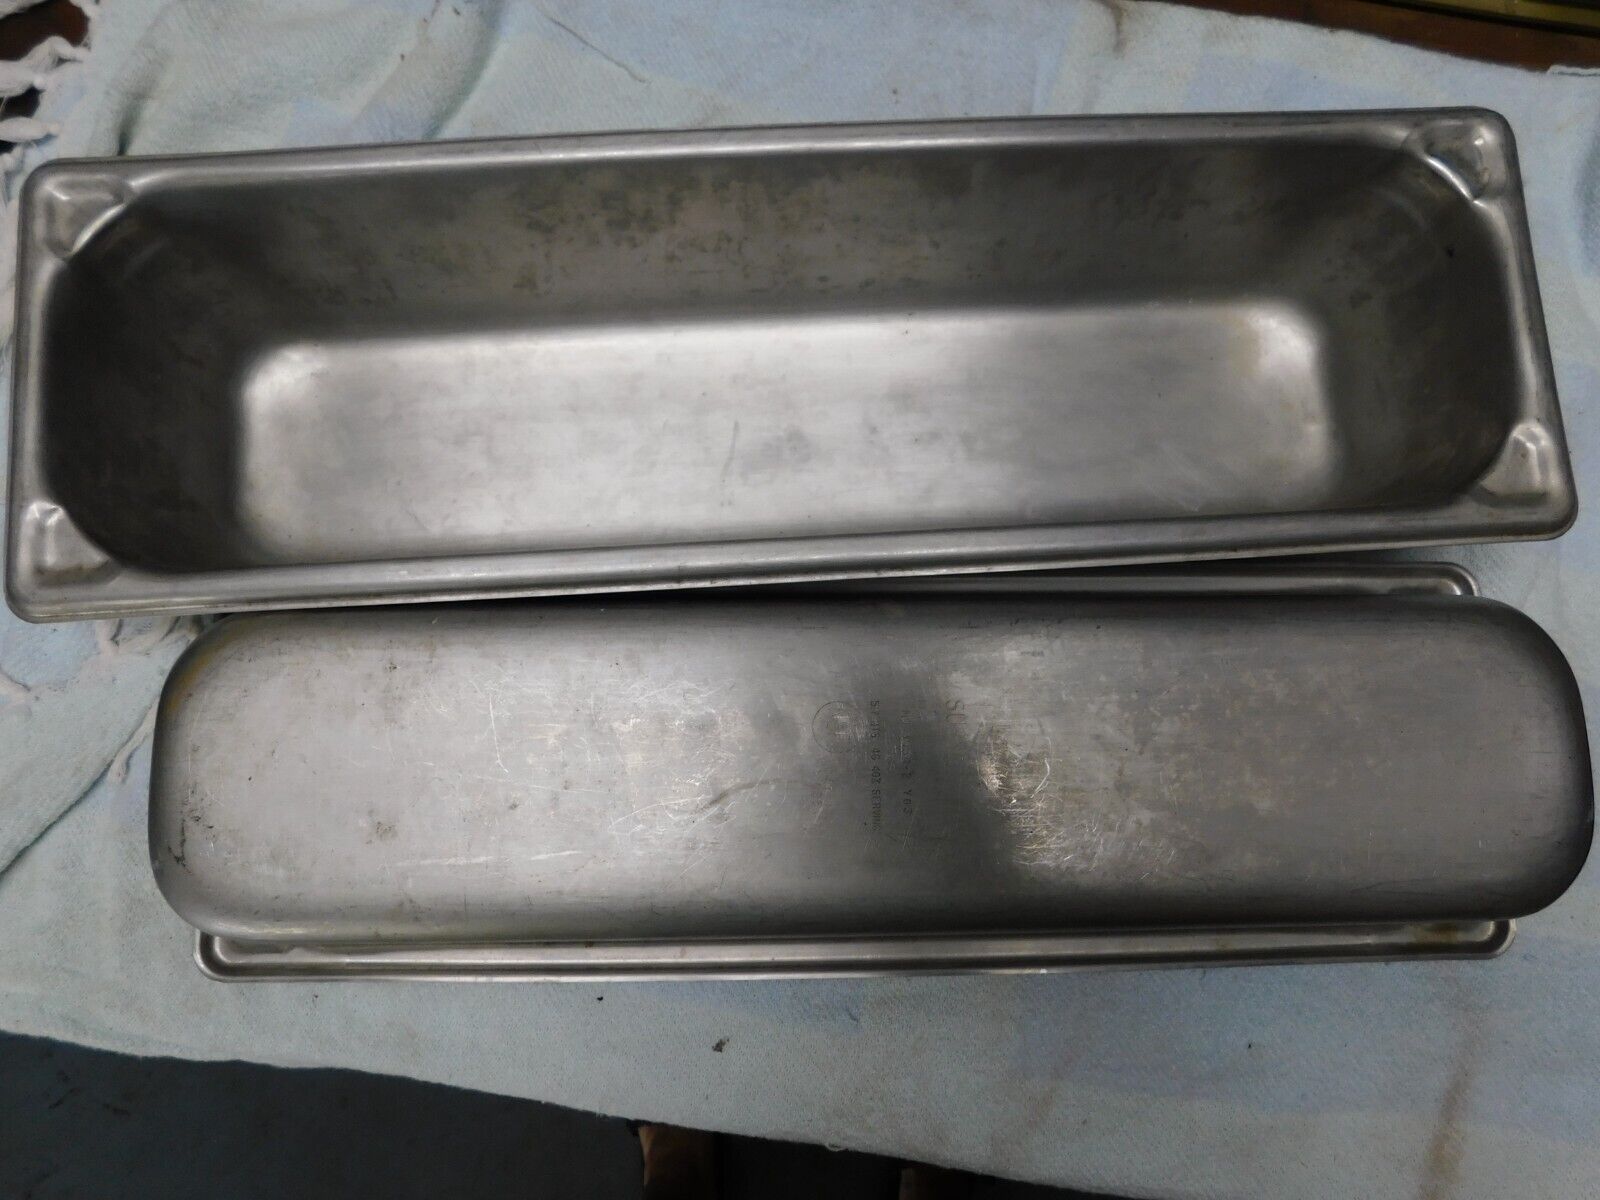 Vollrath Super Pan Ii Part # 3054-2 Depth 4 Inches 20" X 6" Lot Of Two Get Both!